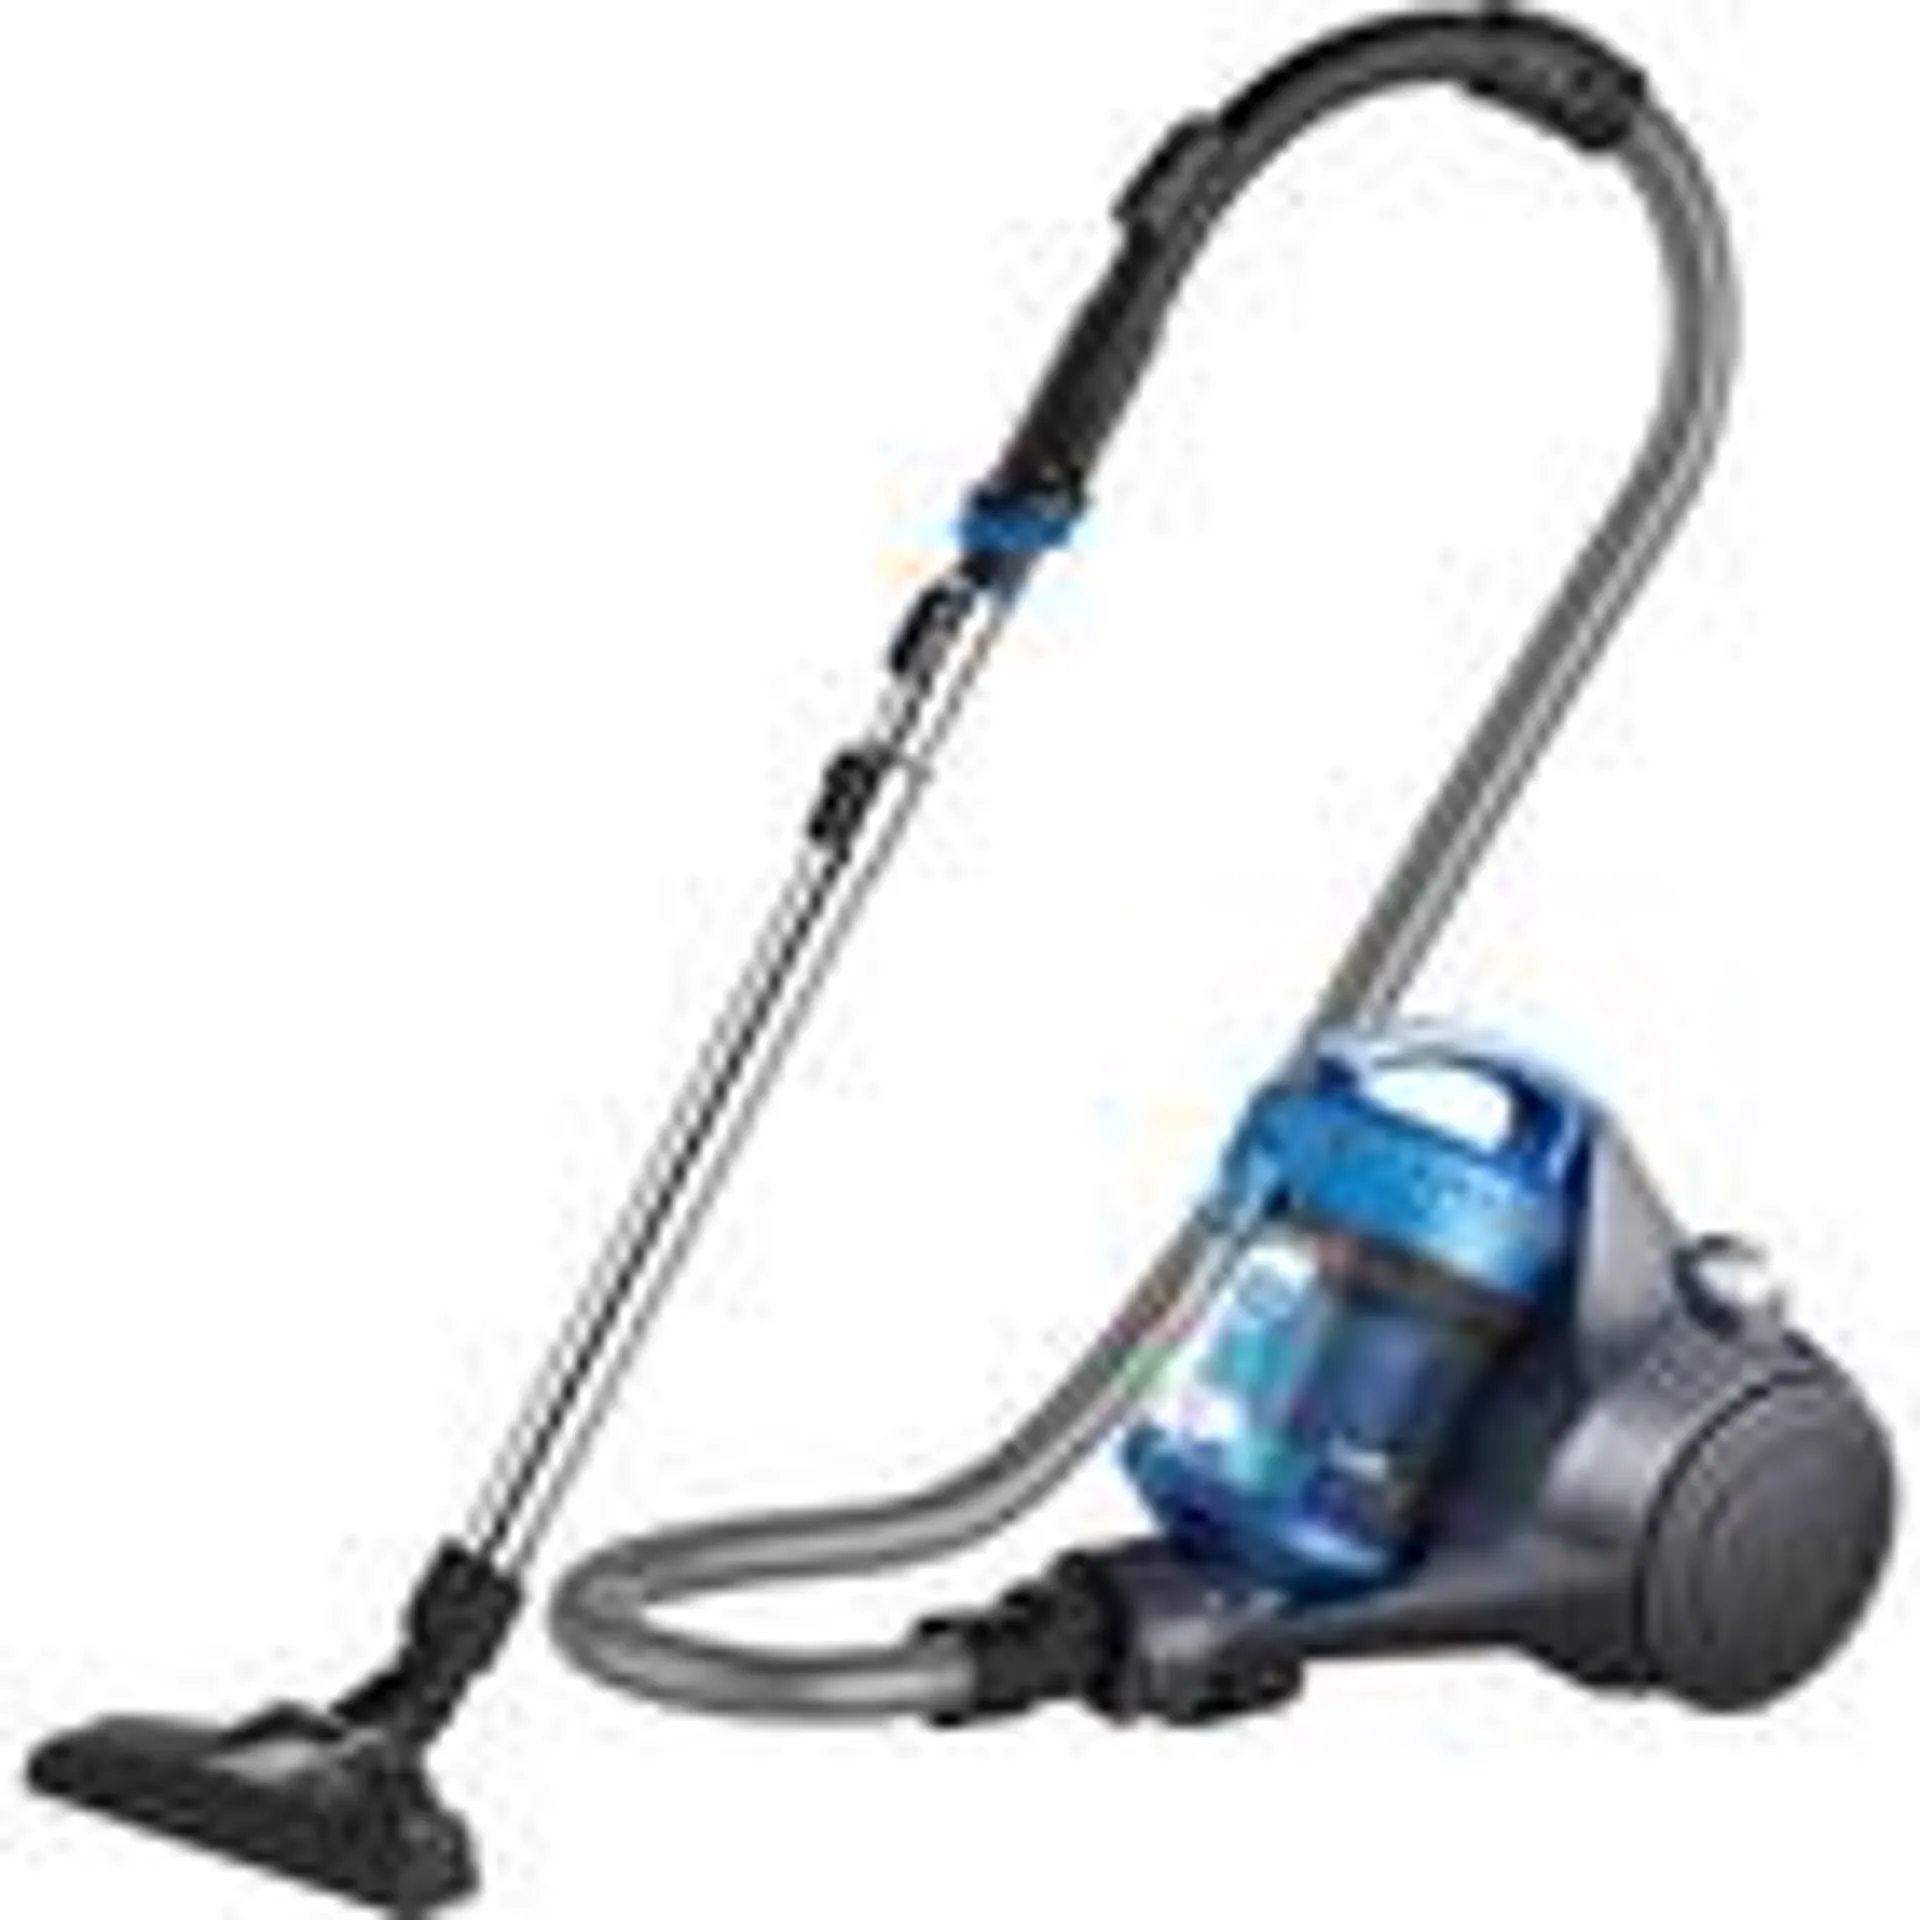 Lightweight Bagless Canister Vacuum with 2 Attachments - Blue